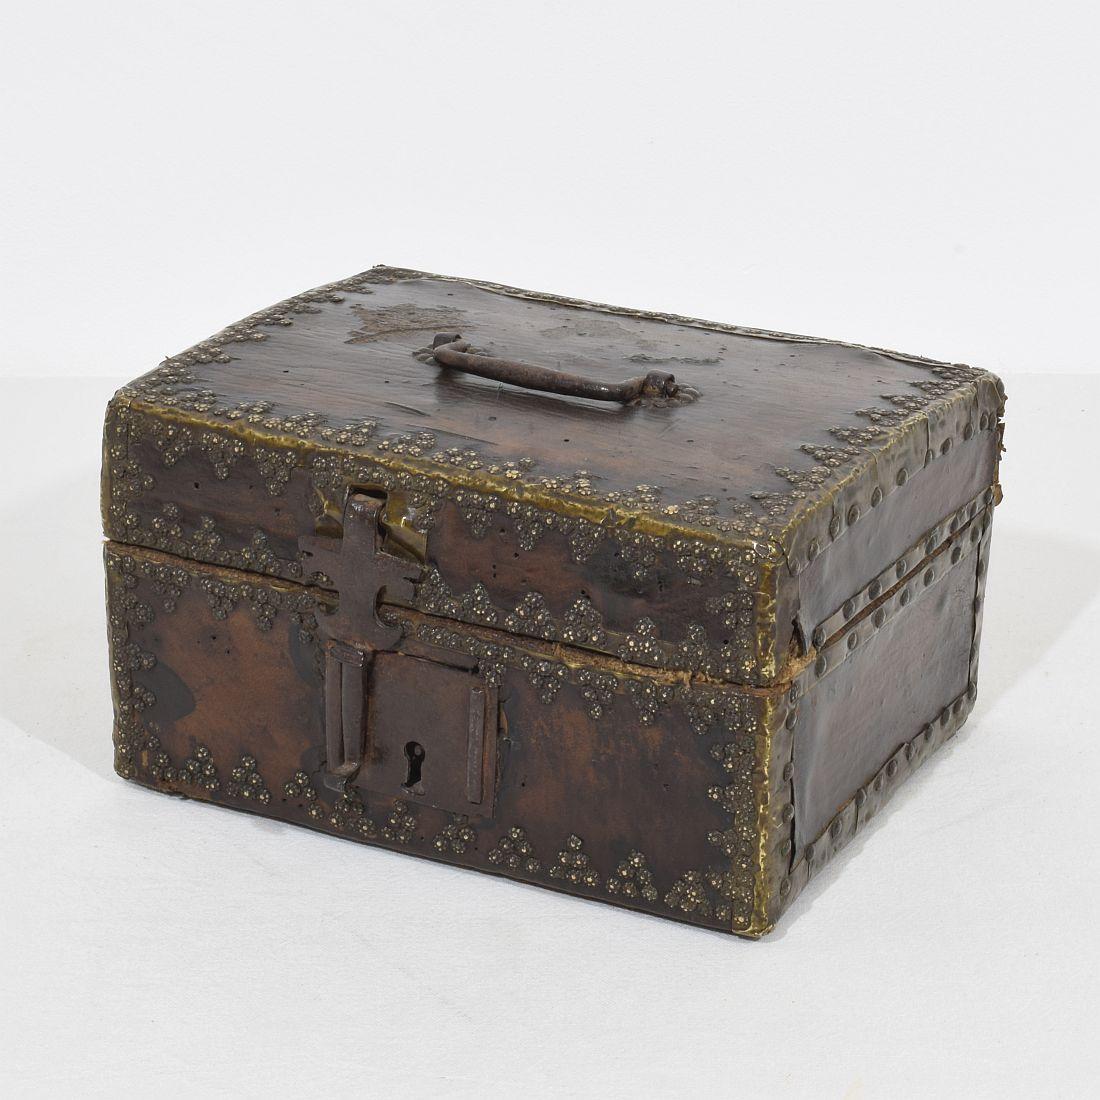 Extremely old box that is covered with leather and metal decorations. 
Rare find.
France, circa 1600-1700.
Weathered and some losses.